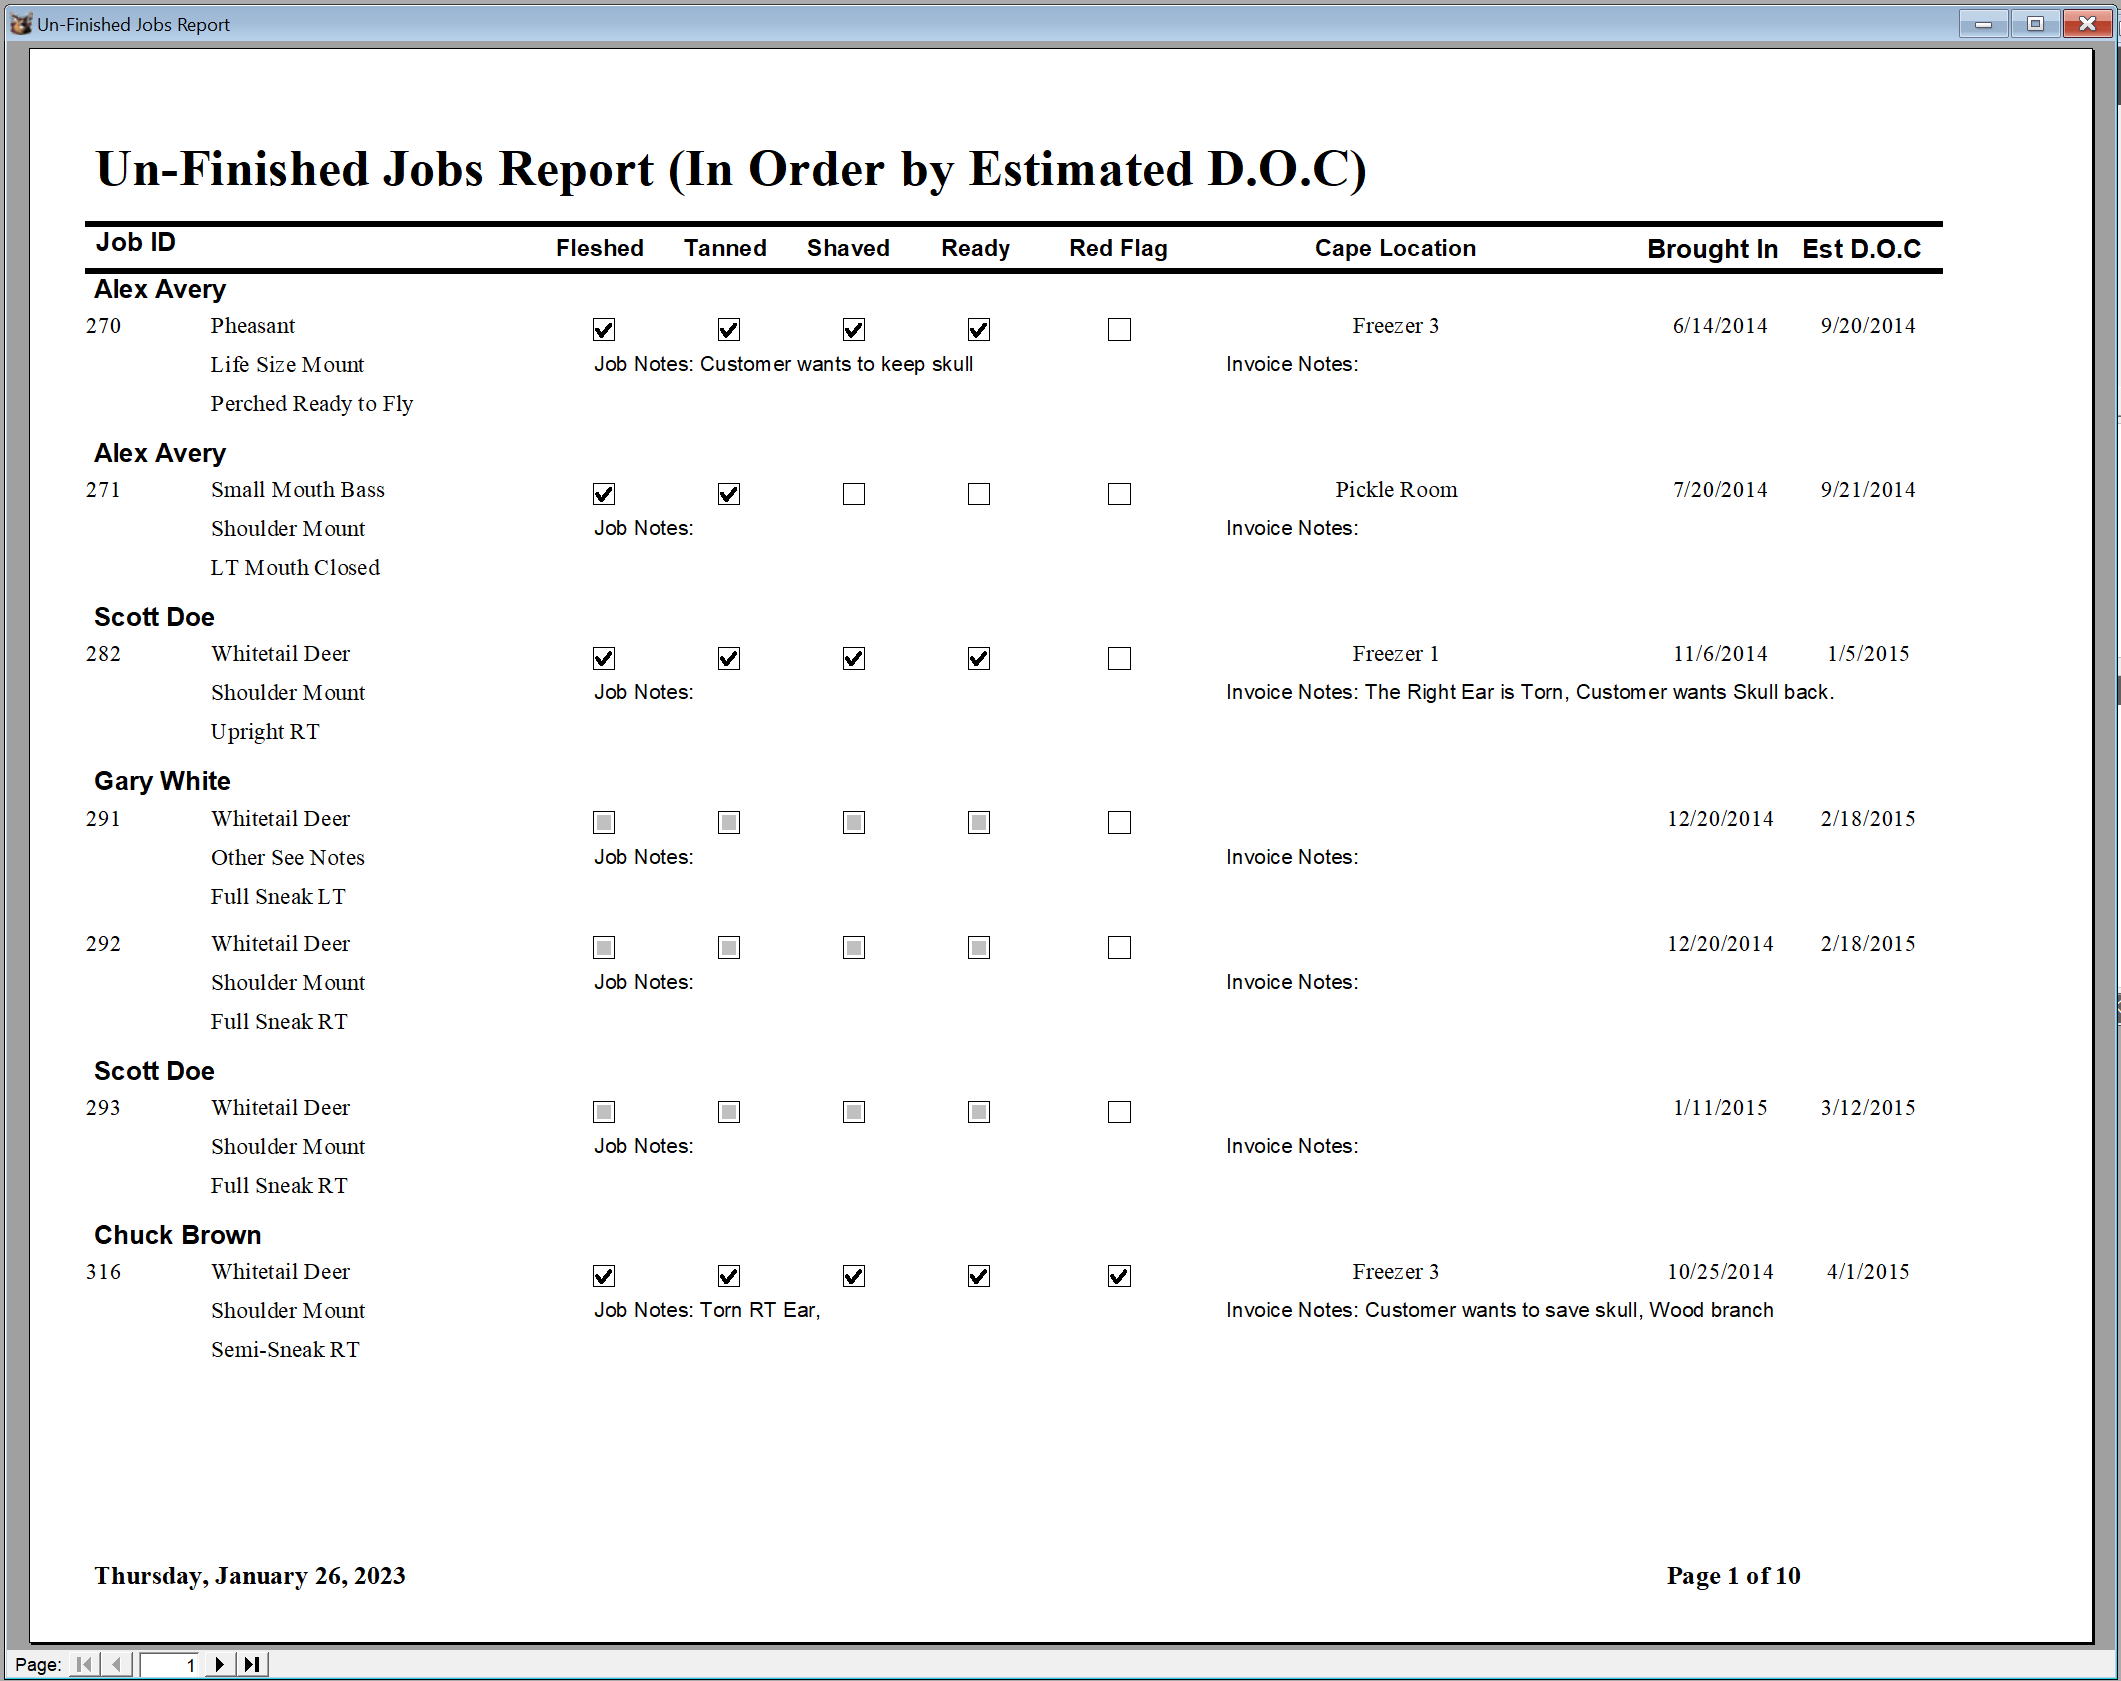 UnFinished_Jobs_report_By_EDOC_report.PNG